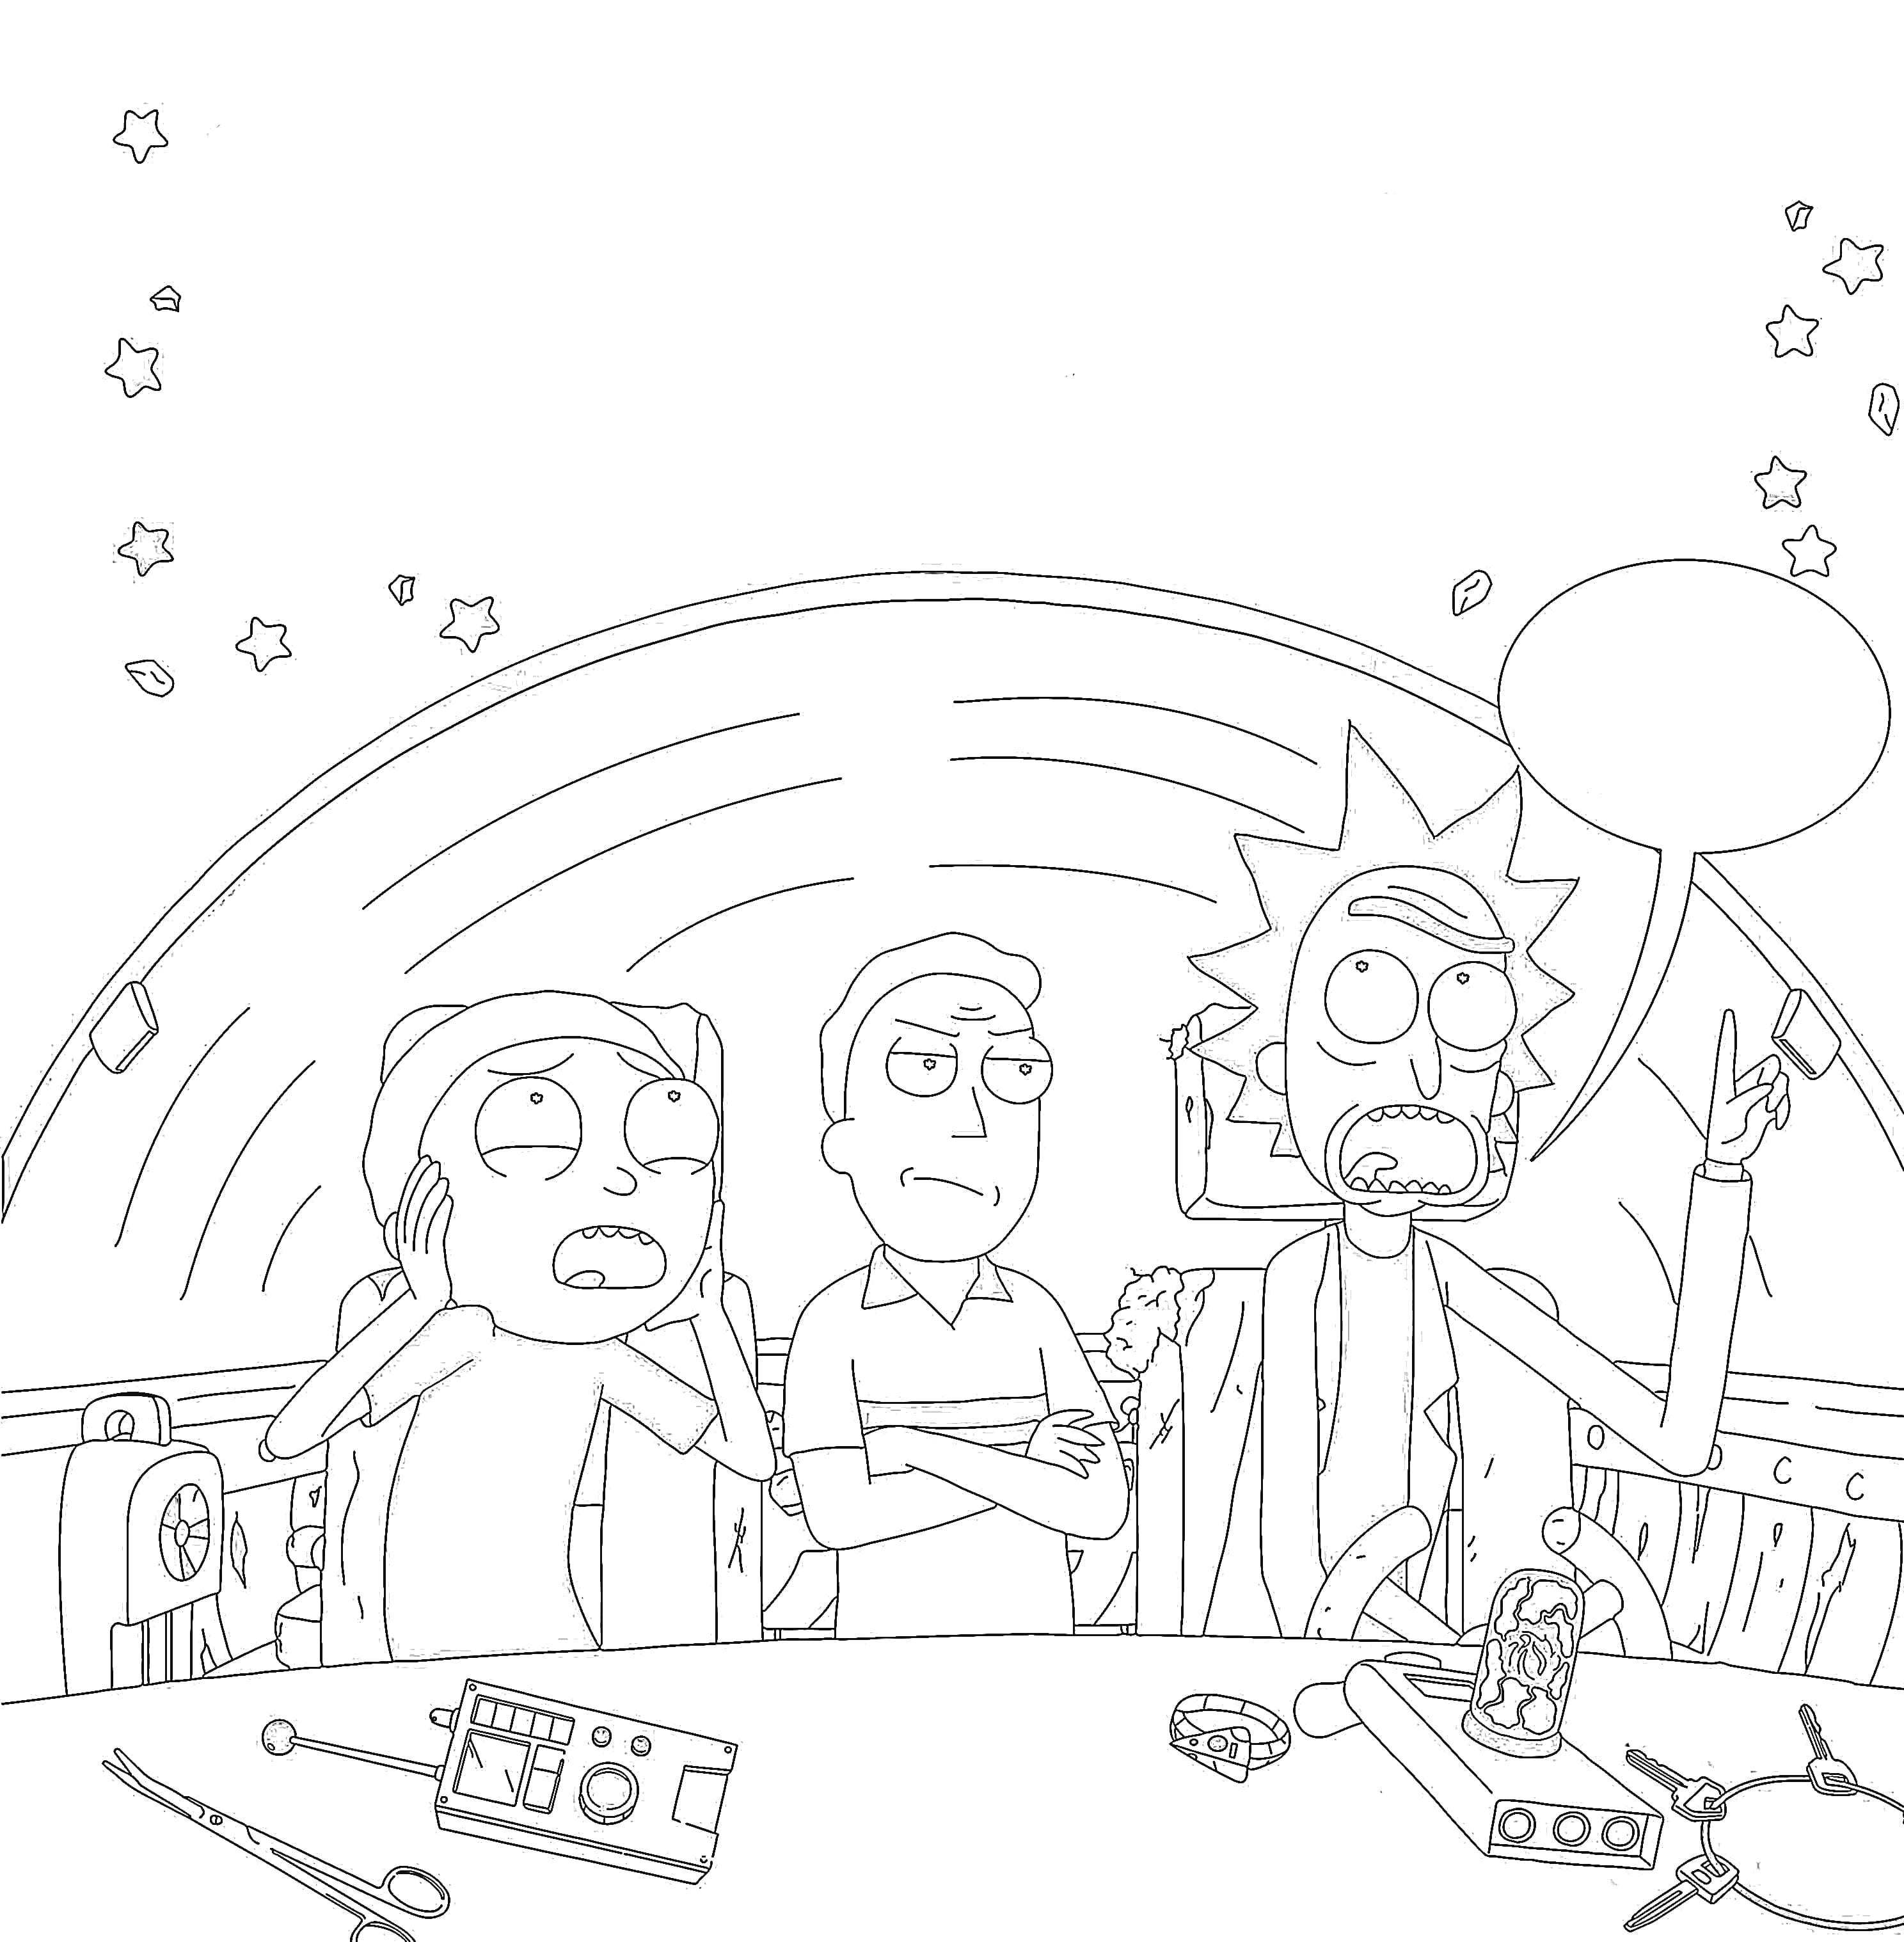 Rick and Morty Coloring Pages 70 Intergalactic Pictures Free Printable.